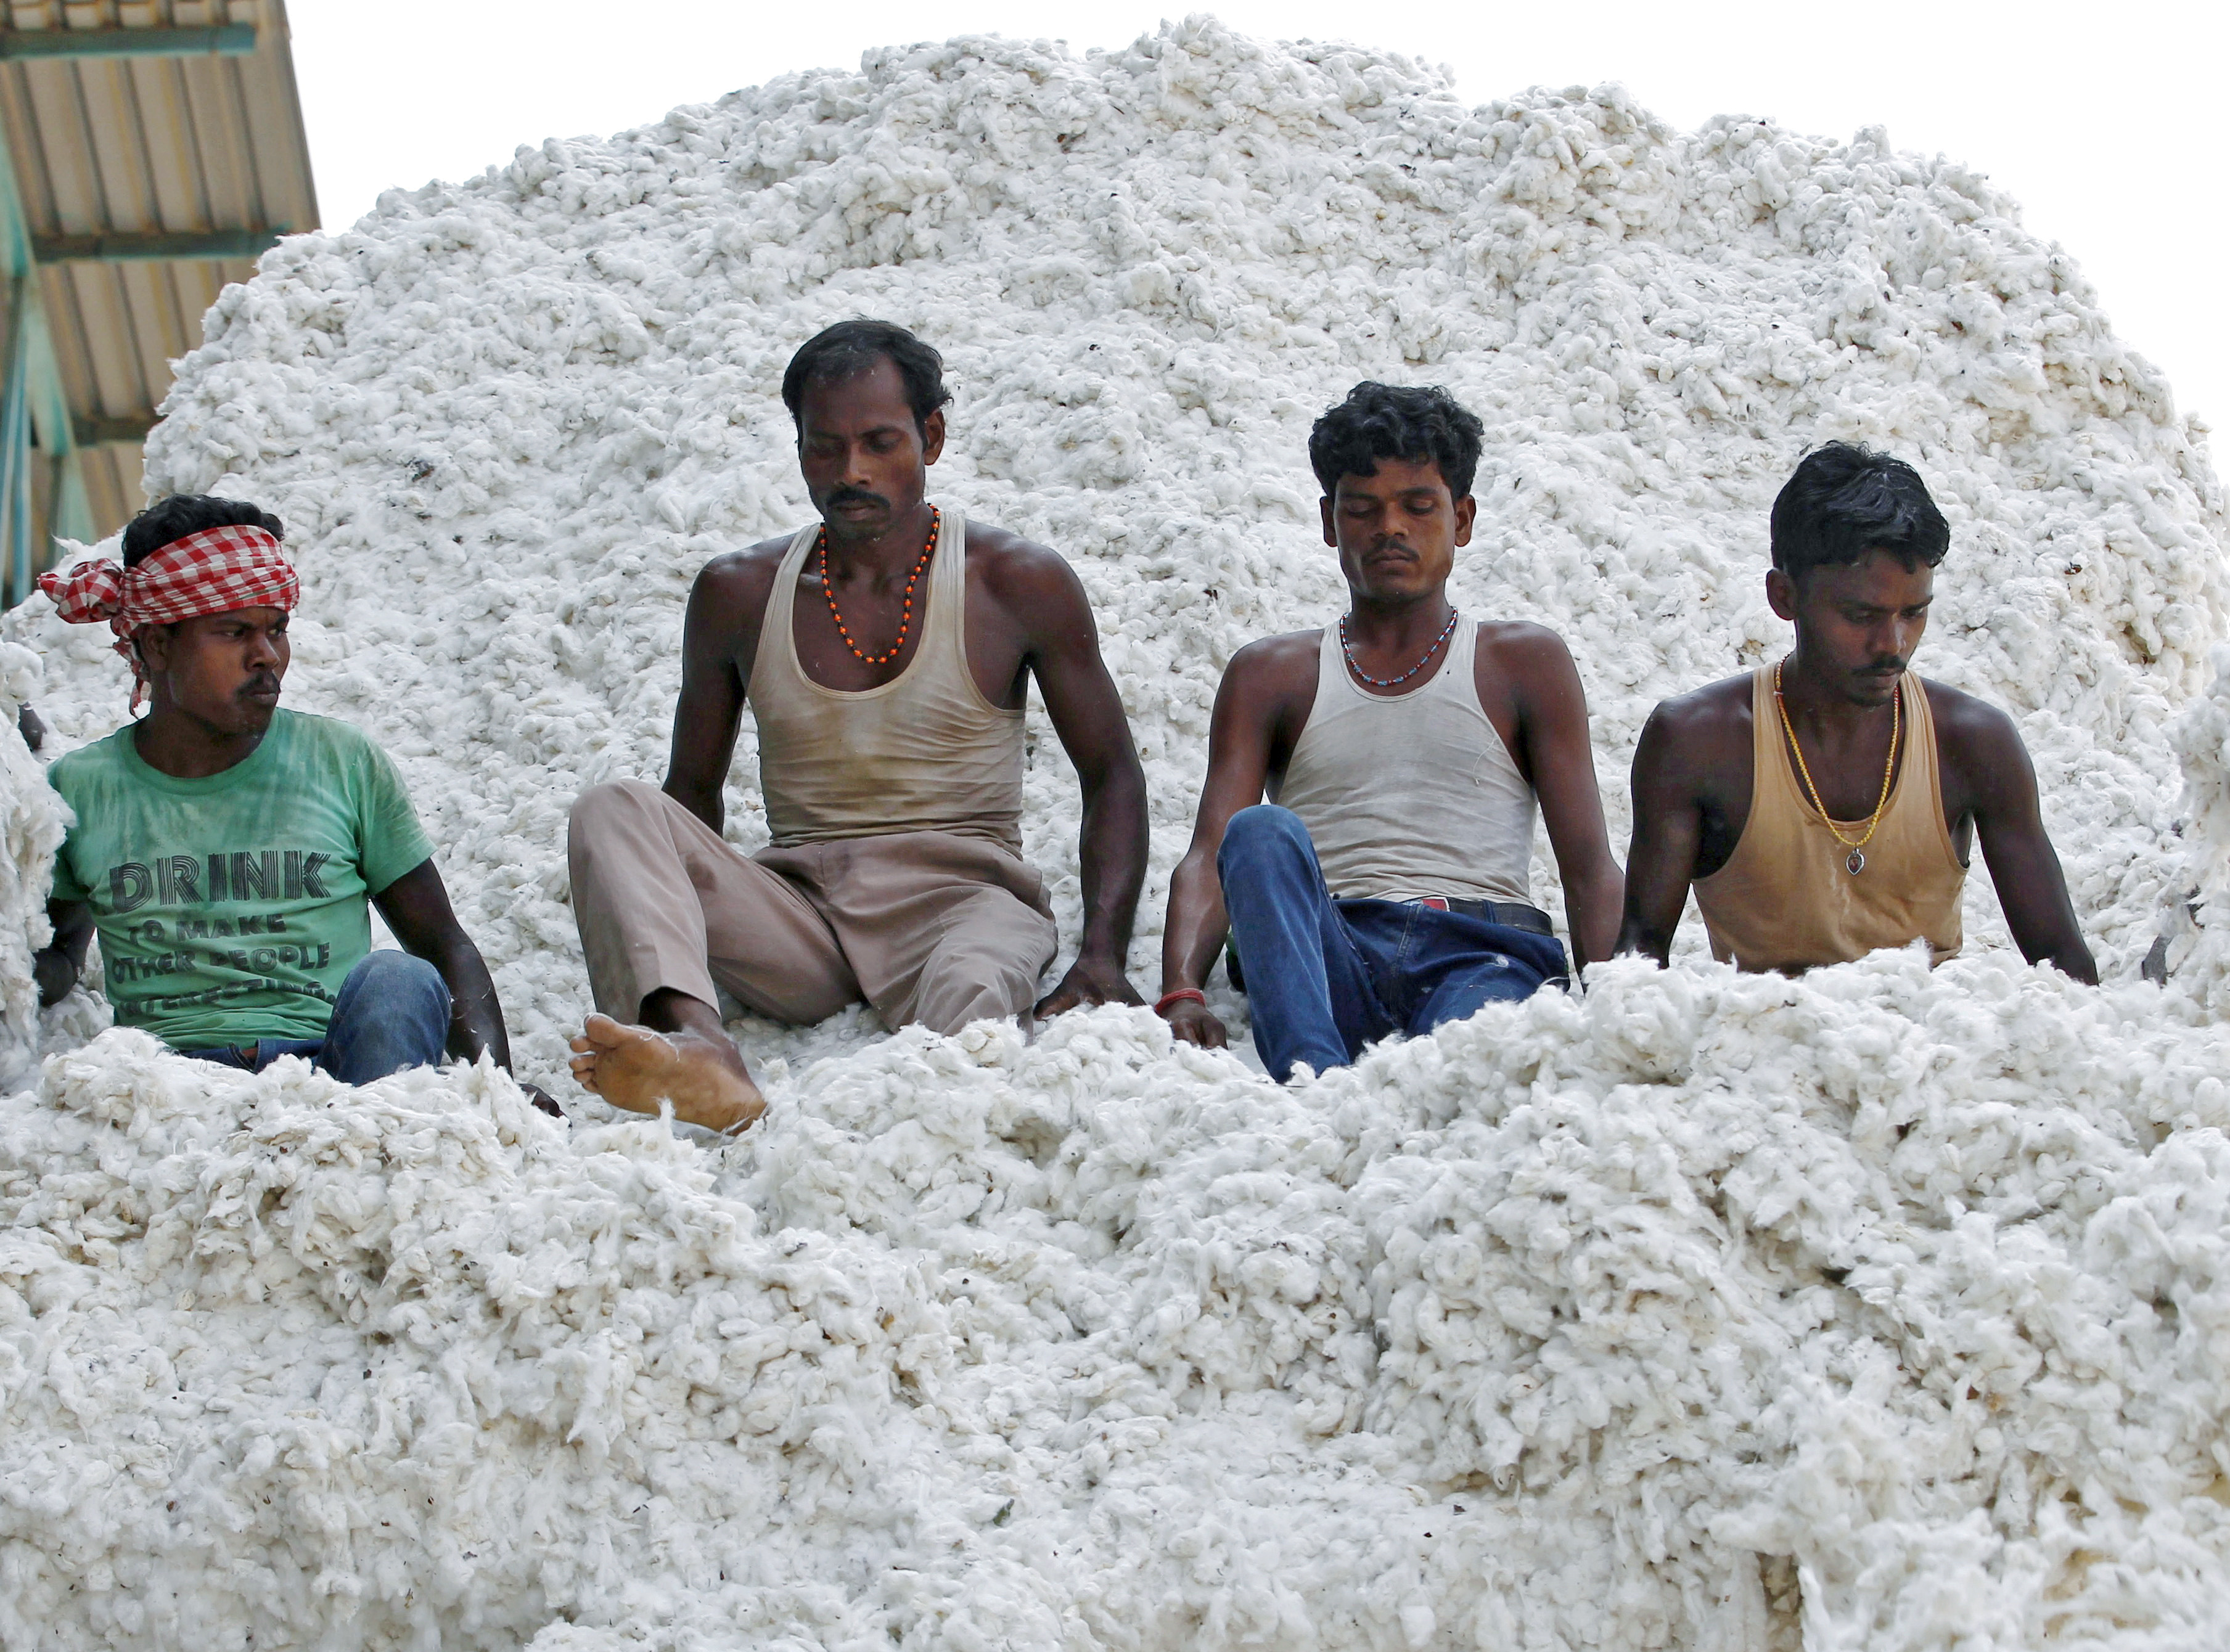 Workers push harvested cotton with their feet as they unload it from a supply truck at a cotton processing unit in Kadi